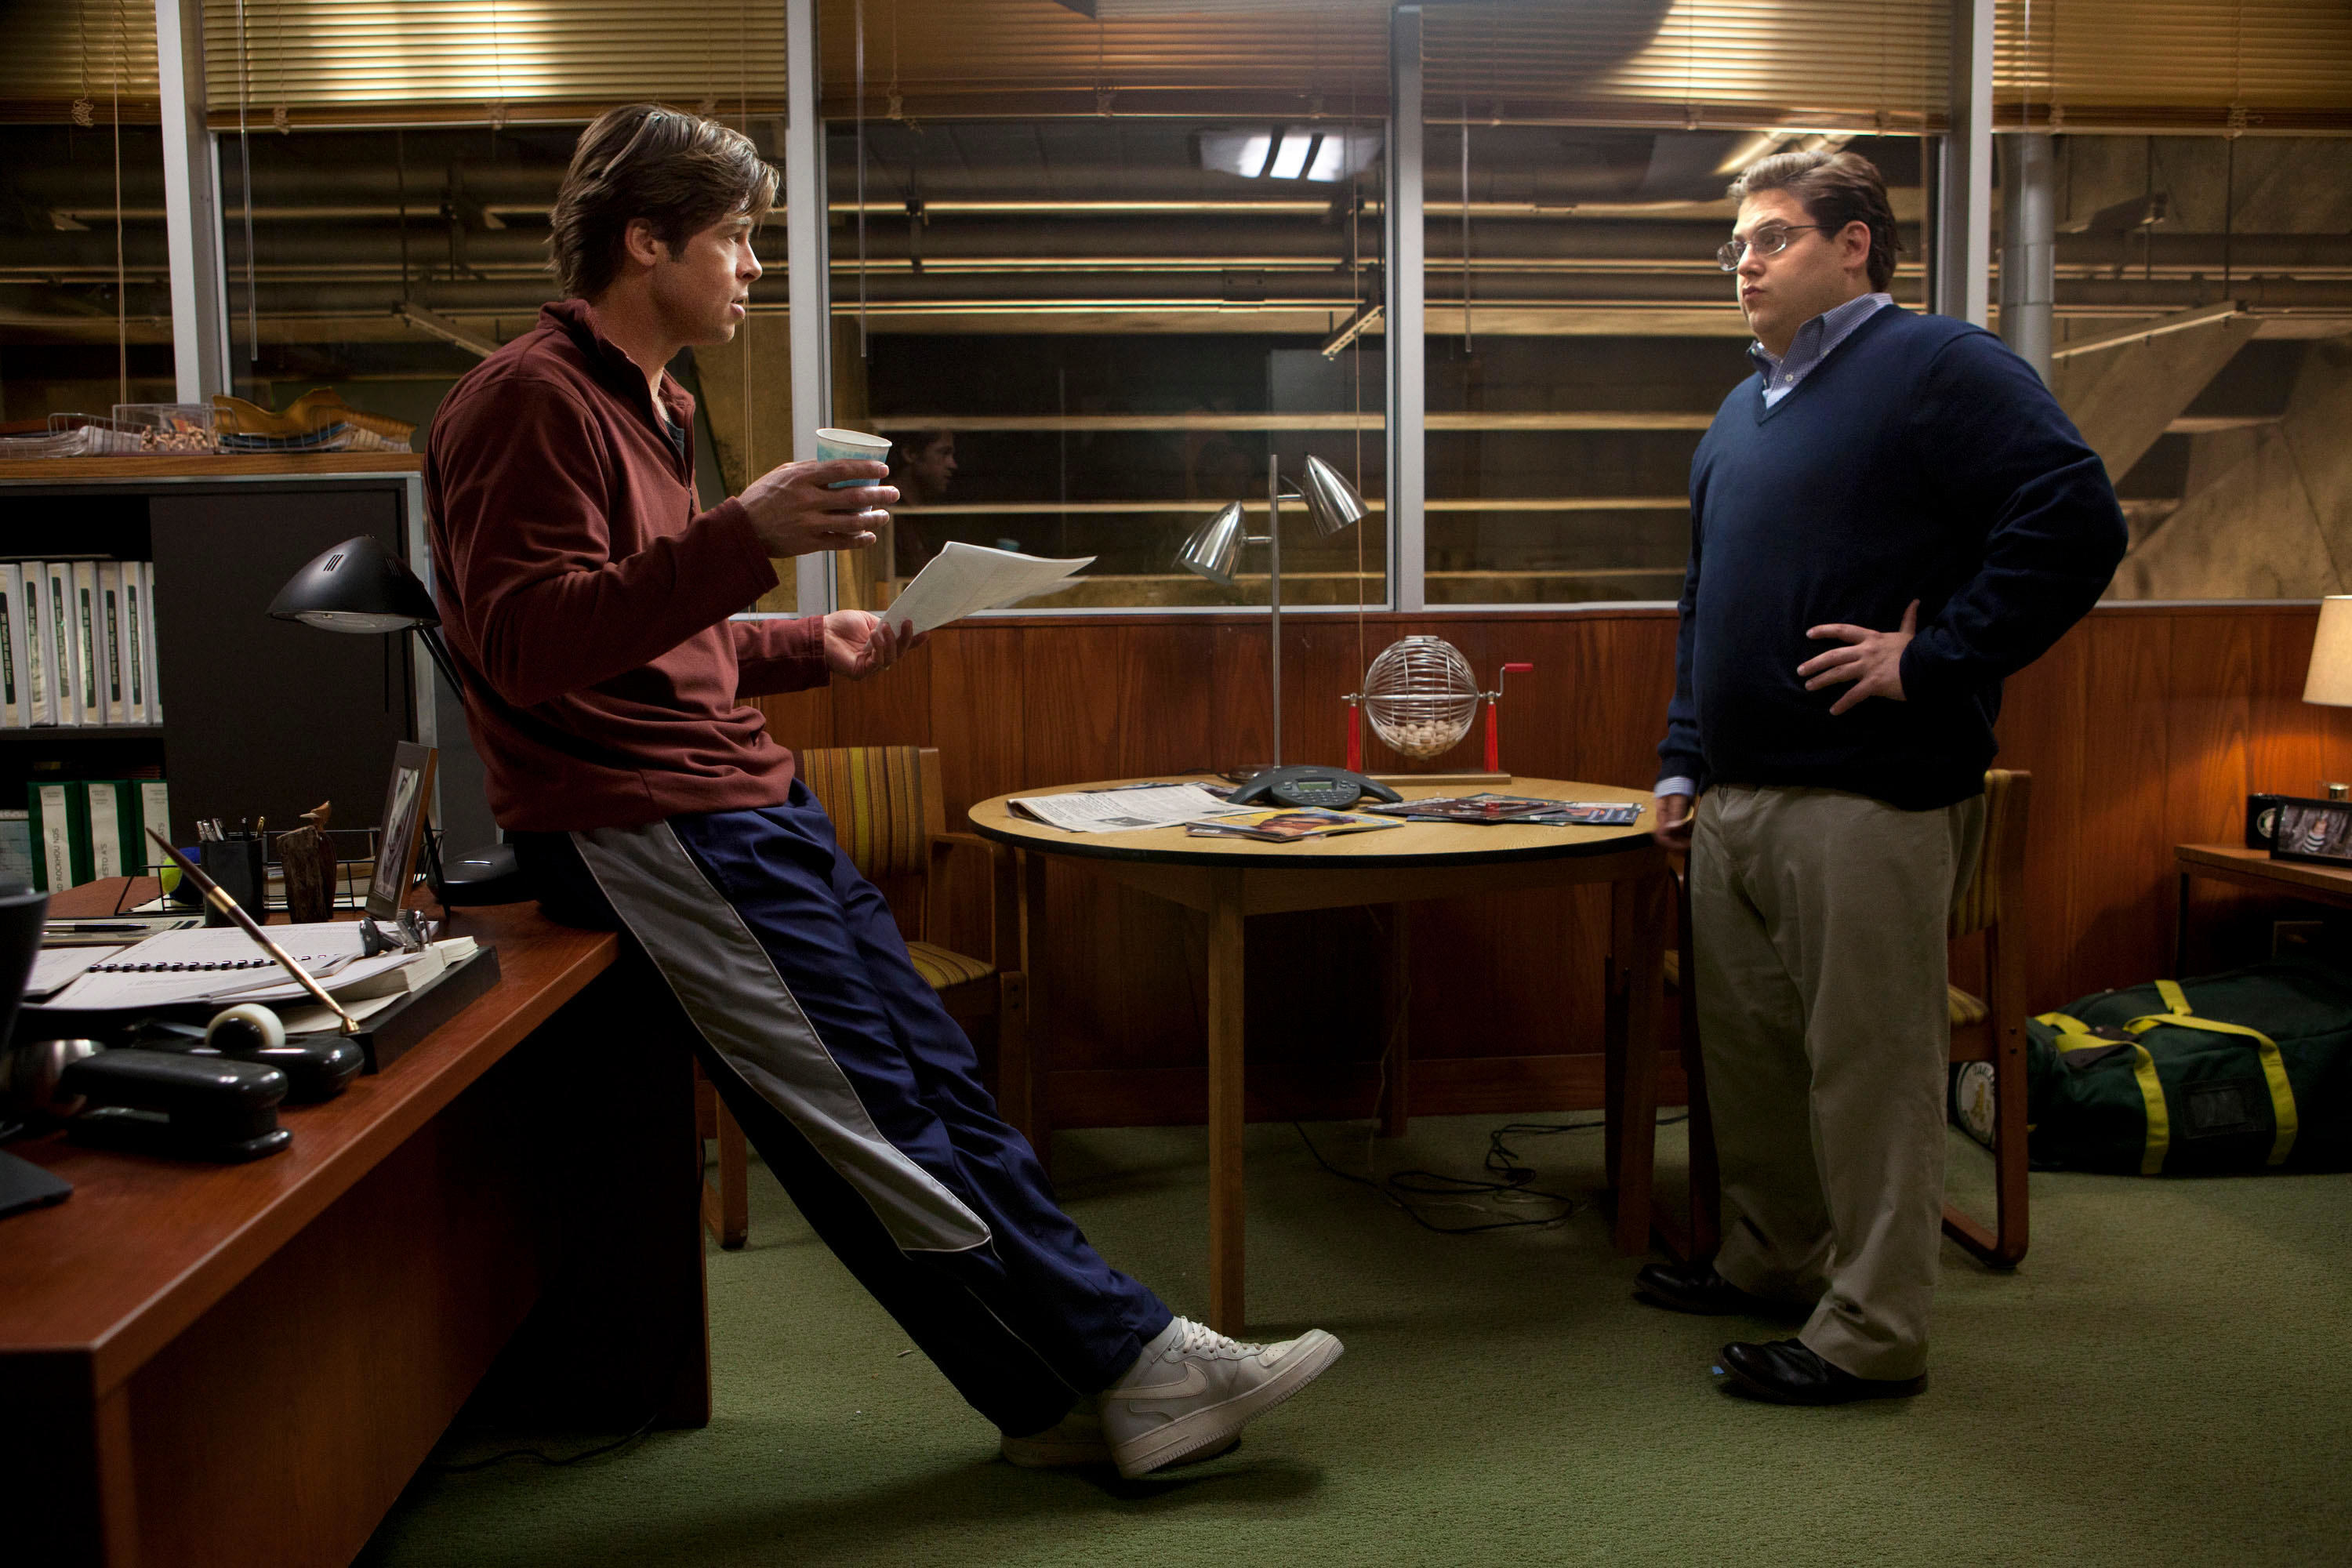 Brad Pitt and Jonah Hill discuss their options in &quot;Moneyball&quot;